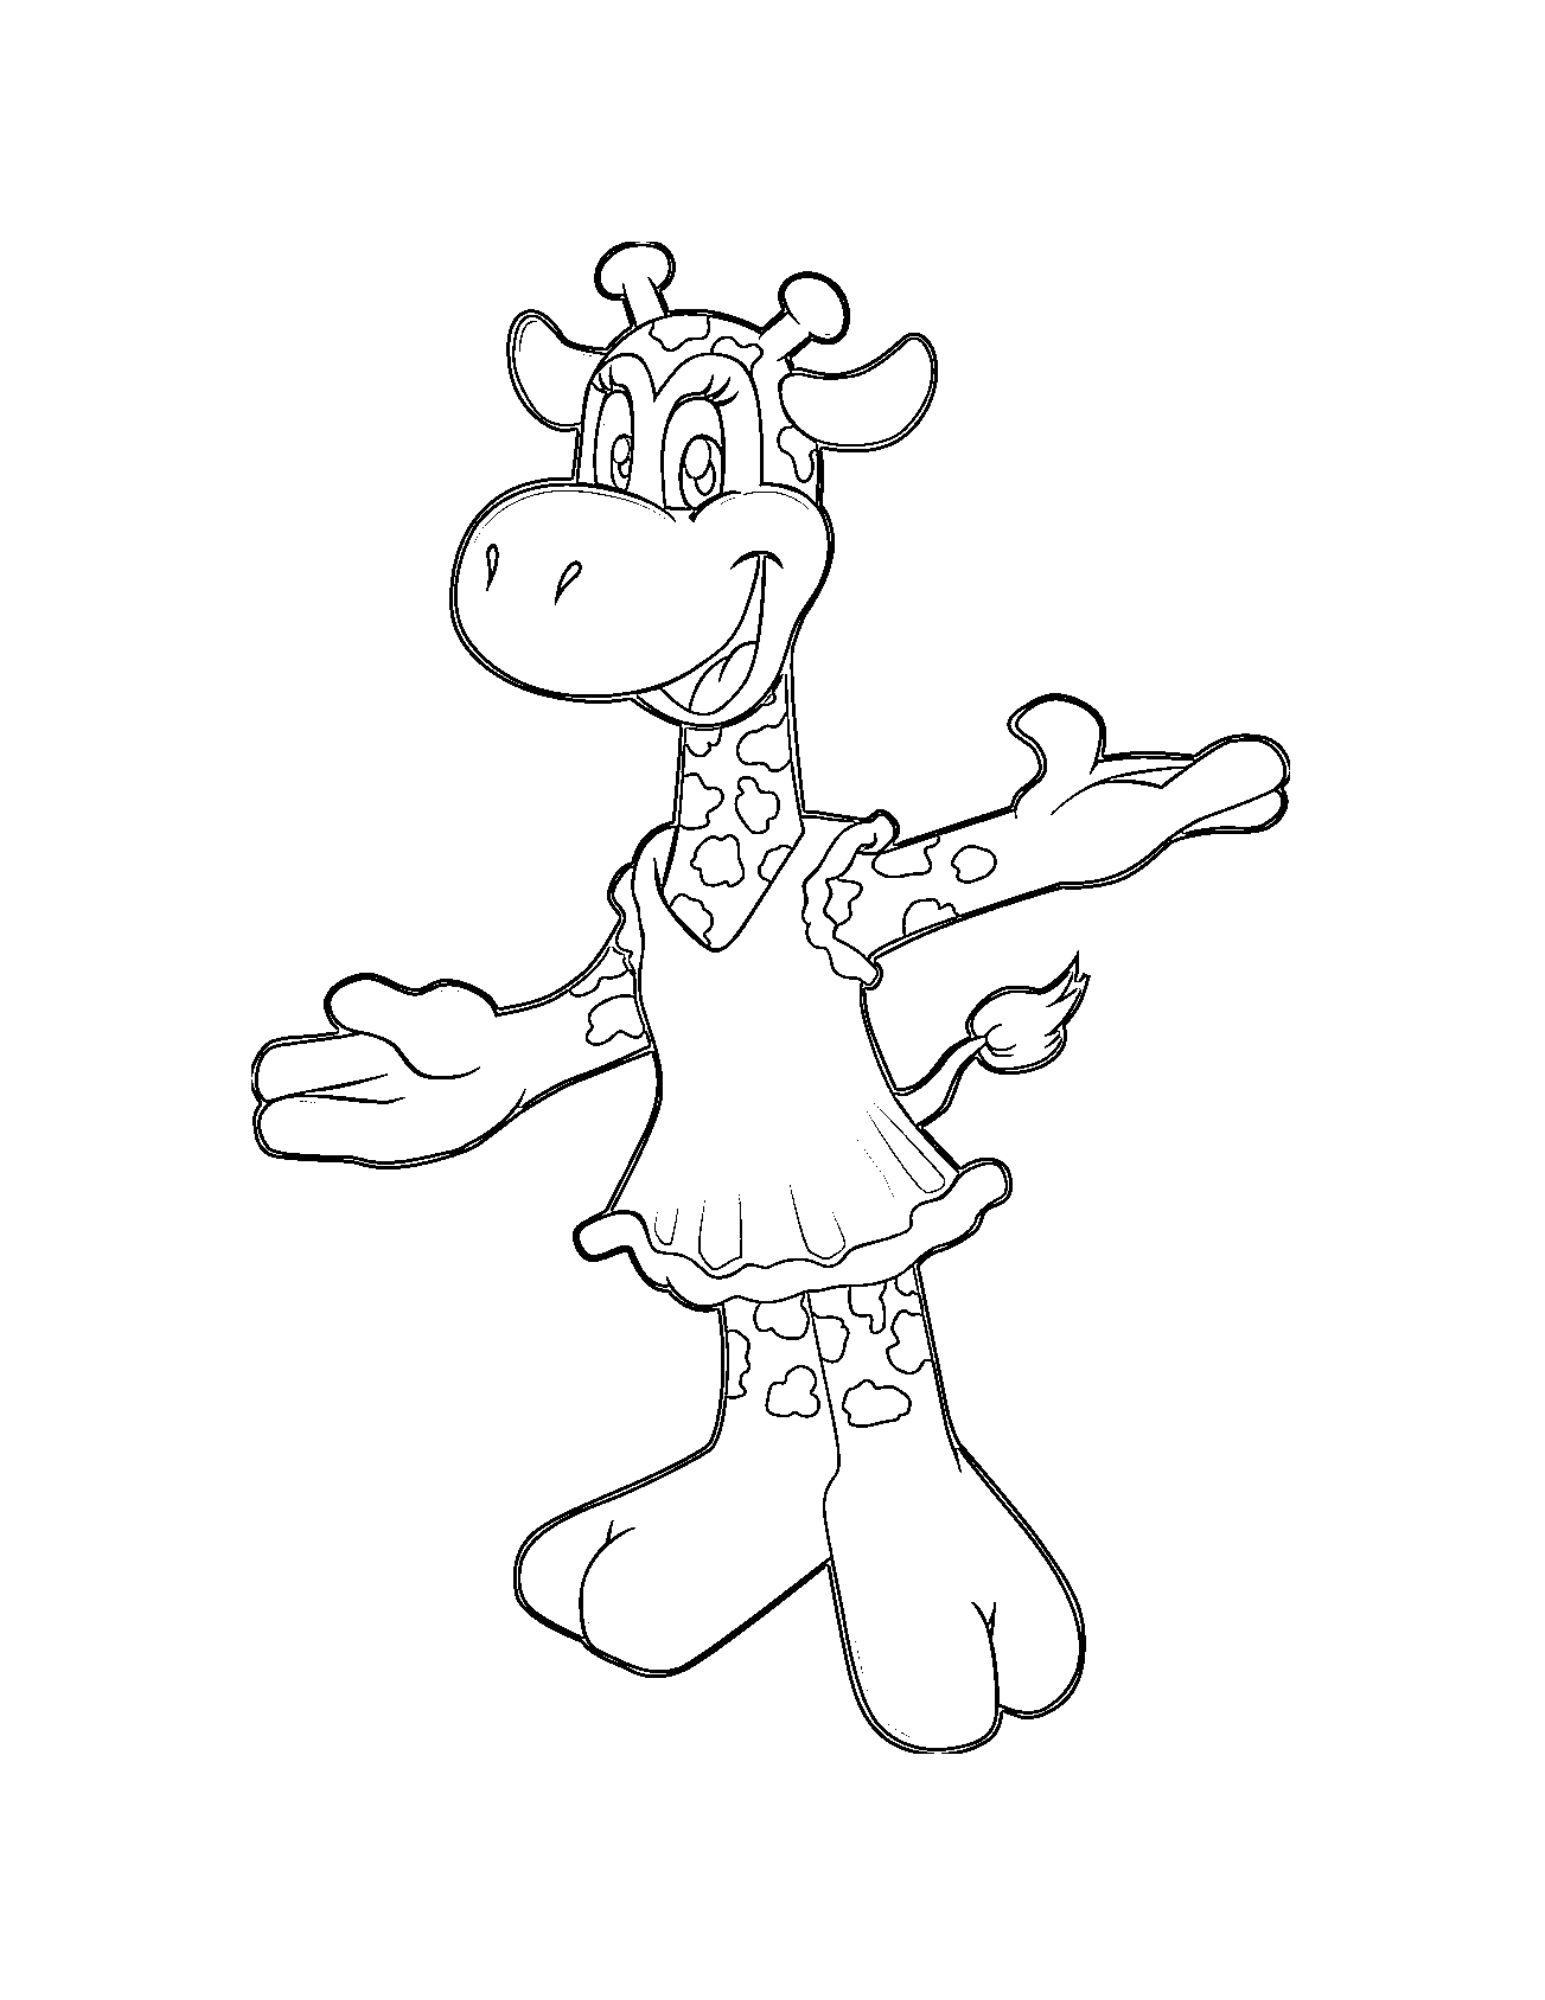 Free Printable Coloring Pages (giraffe)